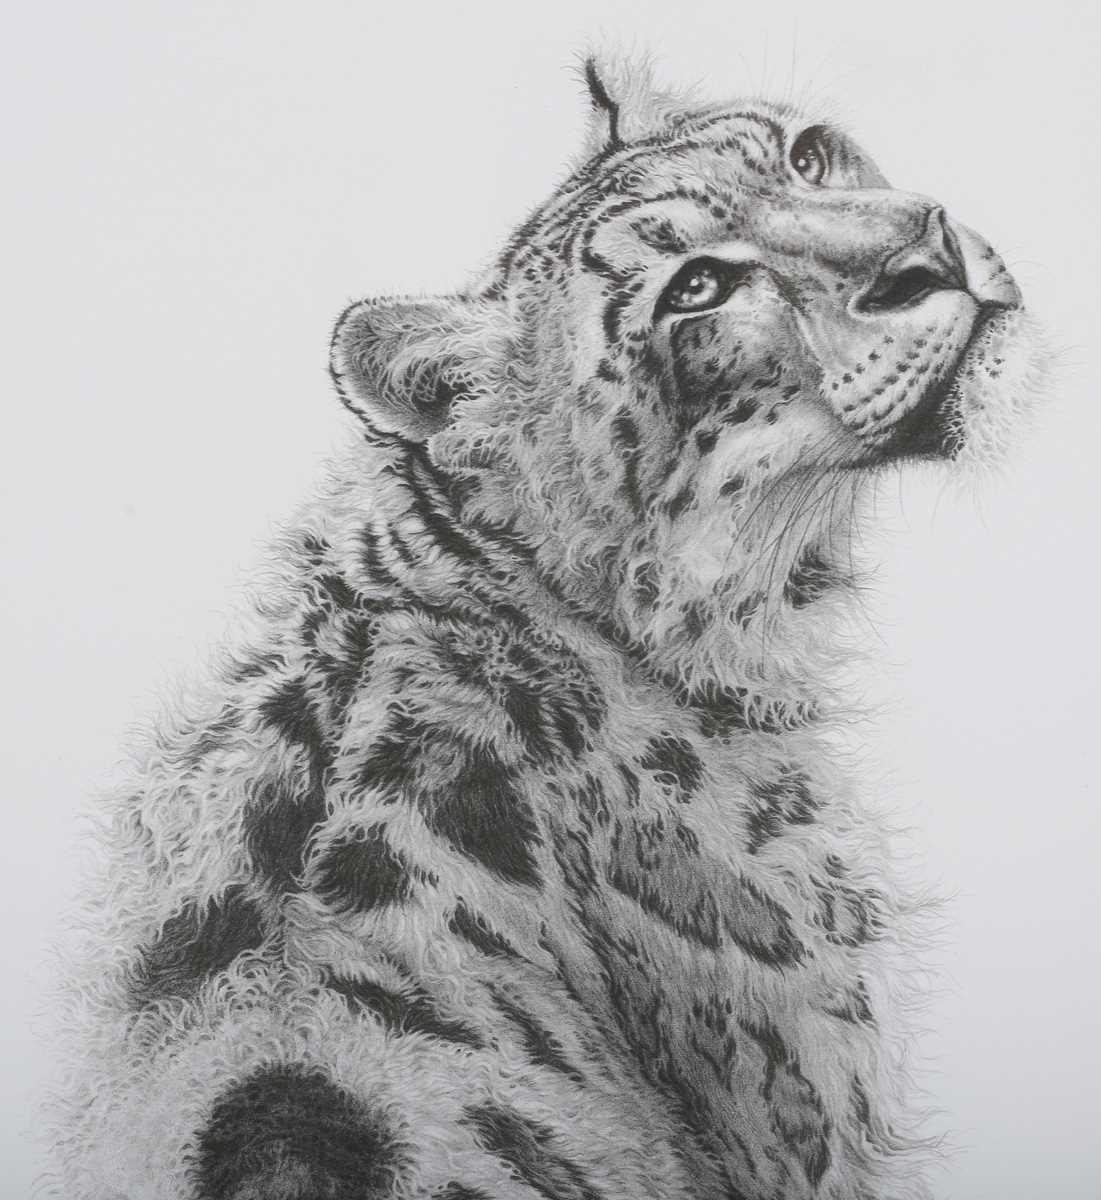 Gary Hodges – ‘Sabu’ (Snow Leopard), 20th century monochrome print, signed and editioned 1044/